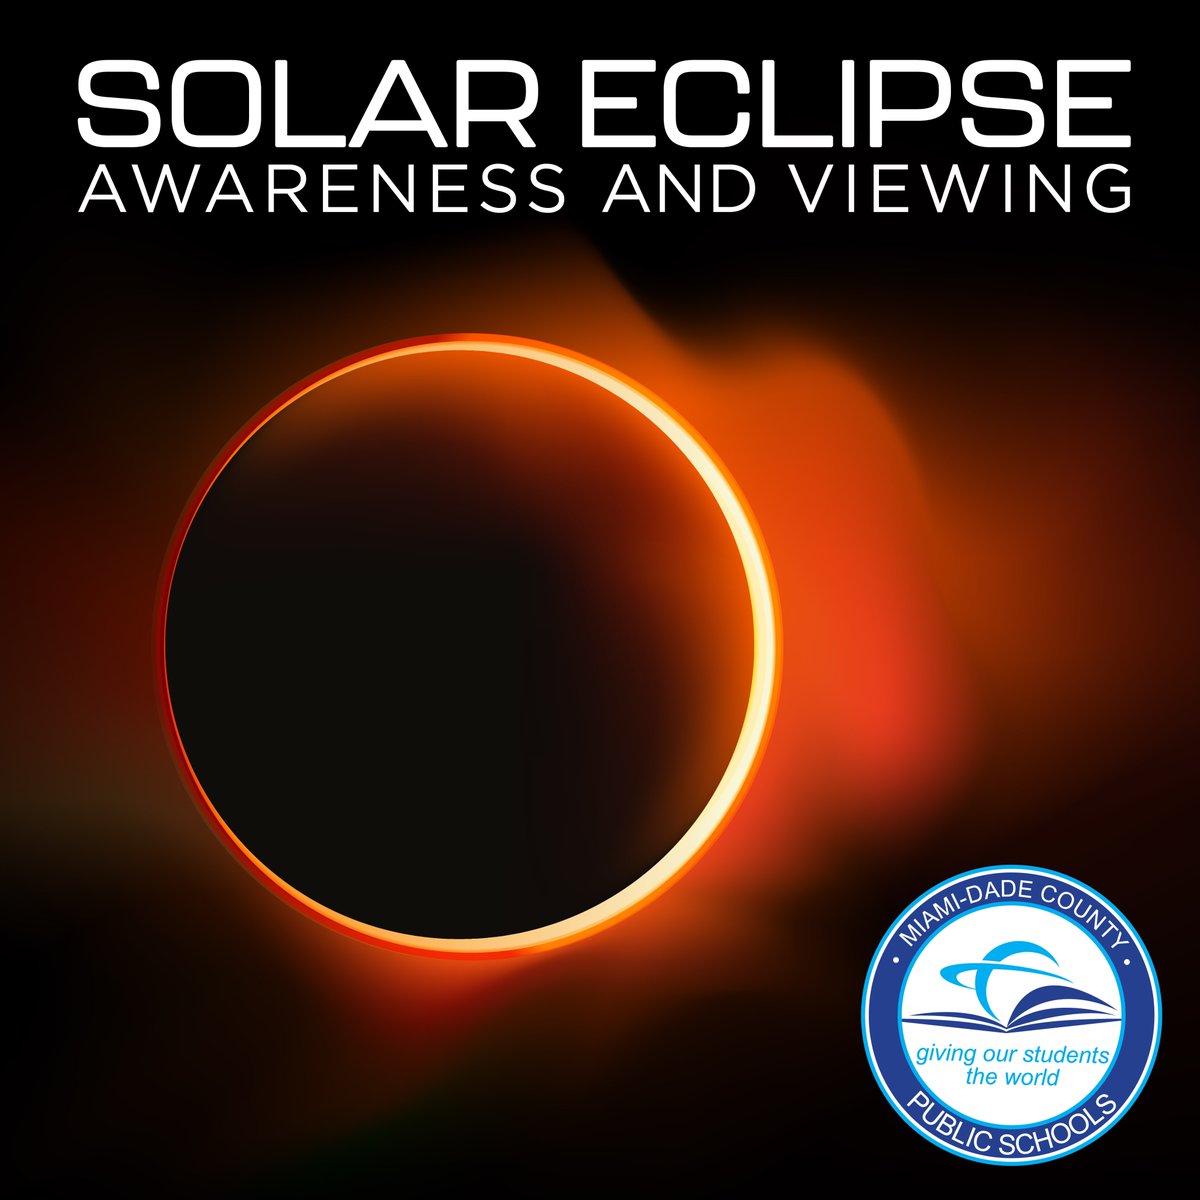 Today, Miami-Dade County will experience a solar eclipse. A solar eclipse occurs when the moon moves between the Earth and the Sun, the shadow blocks all or some of the sun’s light, causing the sky to be increasingly dark. To strike a balance between ensuring student safety and